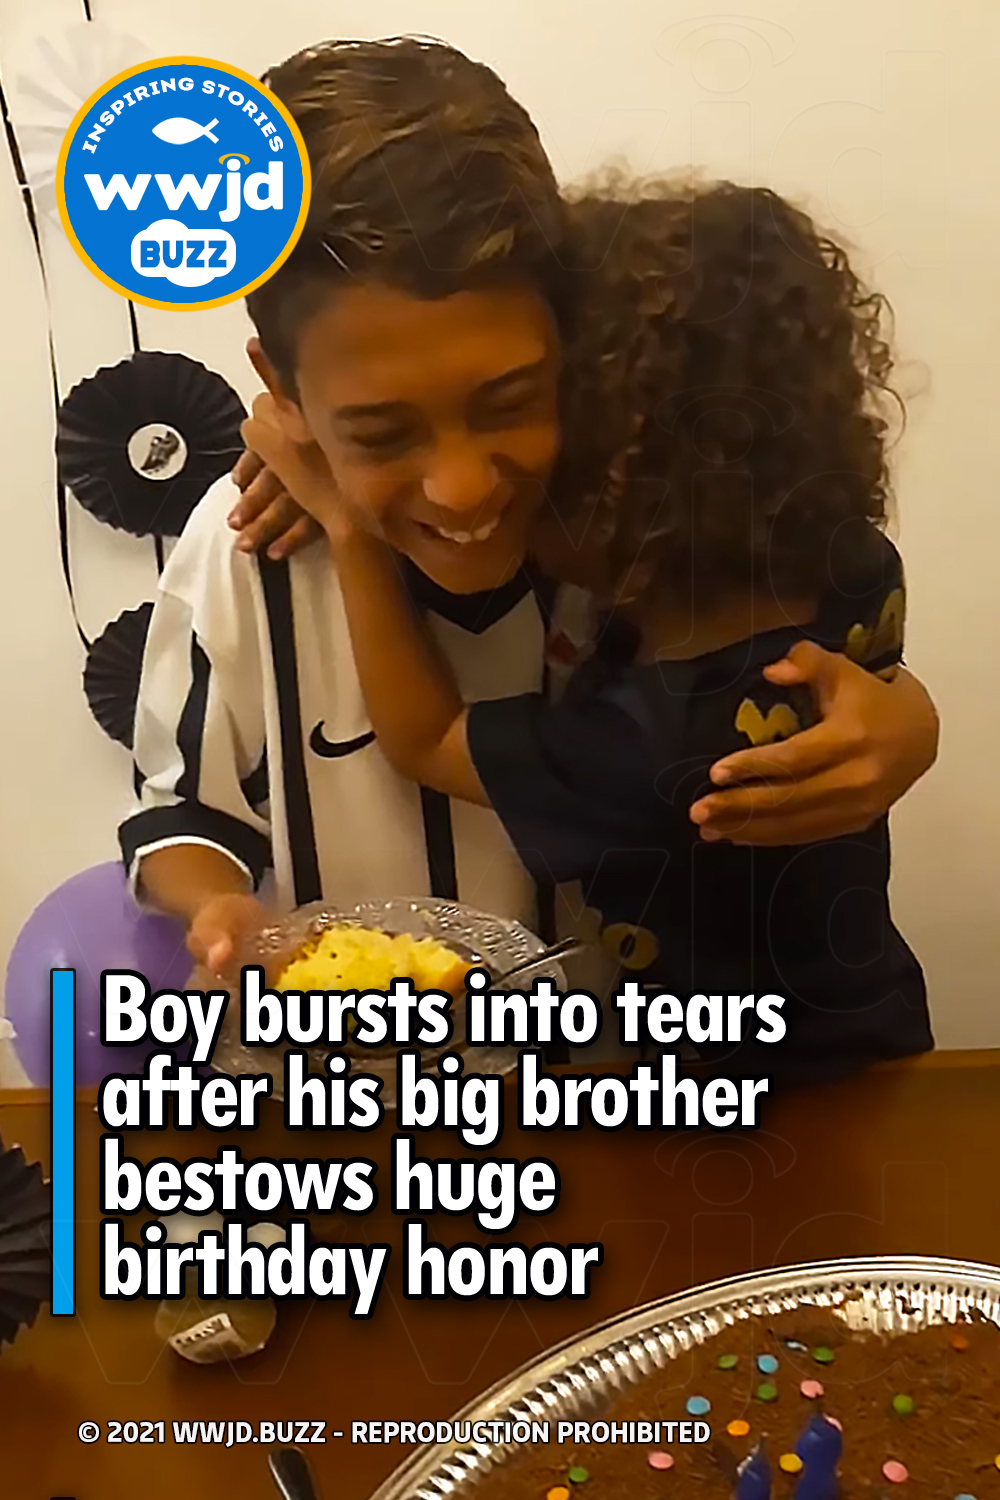 Boy bursts into tears after his big brother bestows huge birthday honor